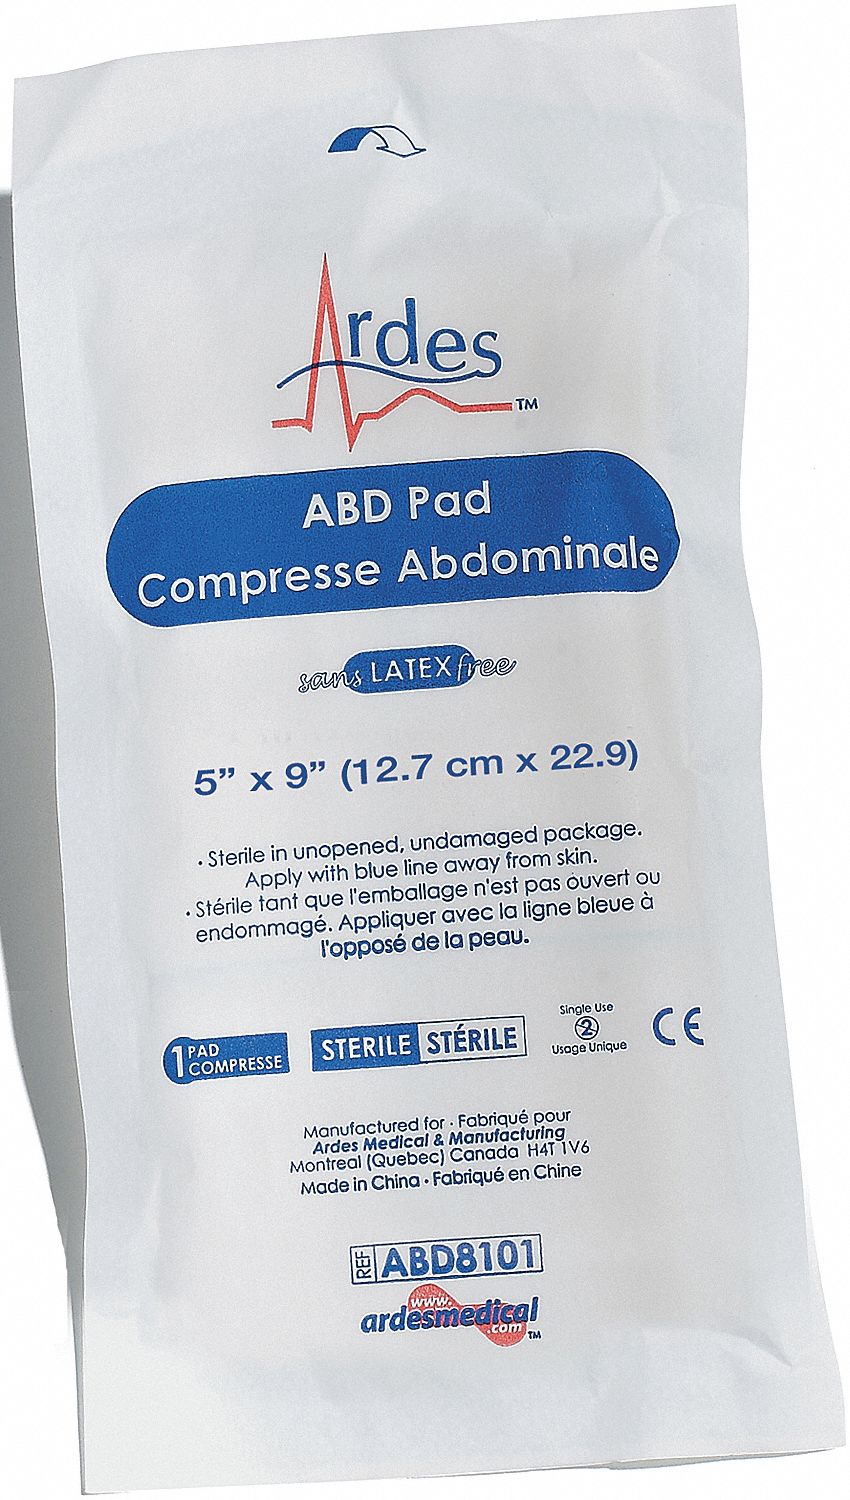 ABDOMINAL PAD, HI ABSORB, FOLDABLE, LATEX FREE, STERILE, 5 X 9 IN